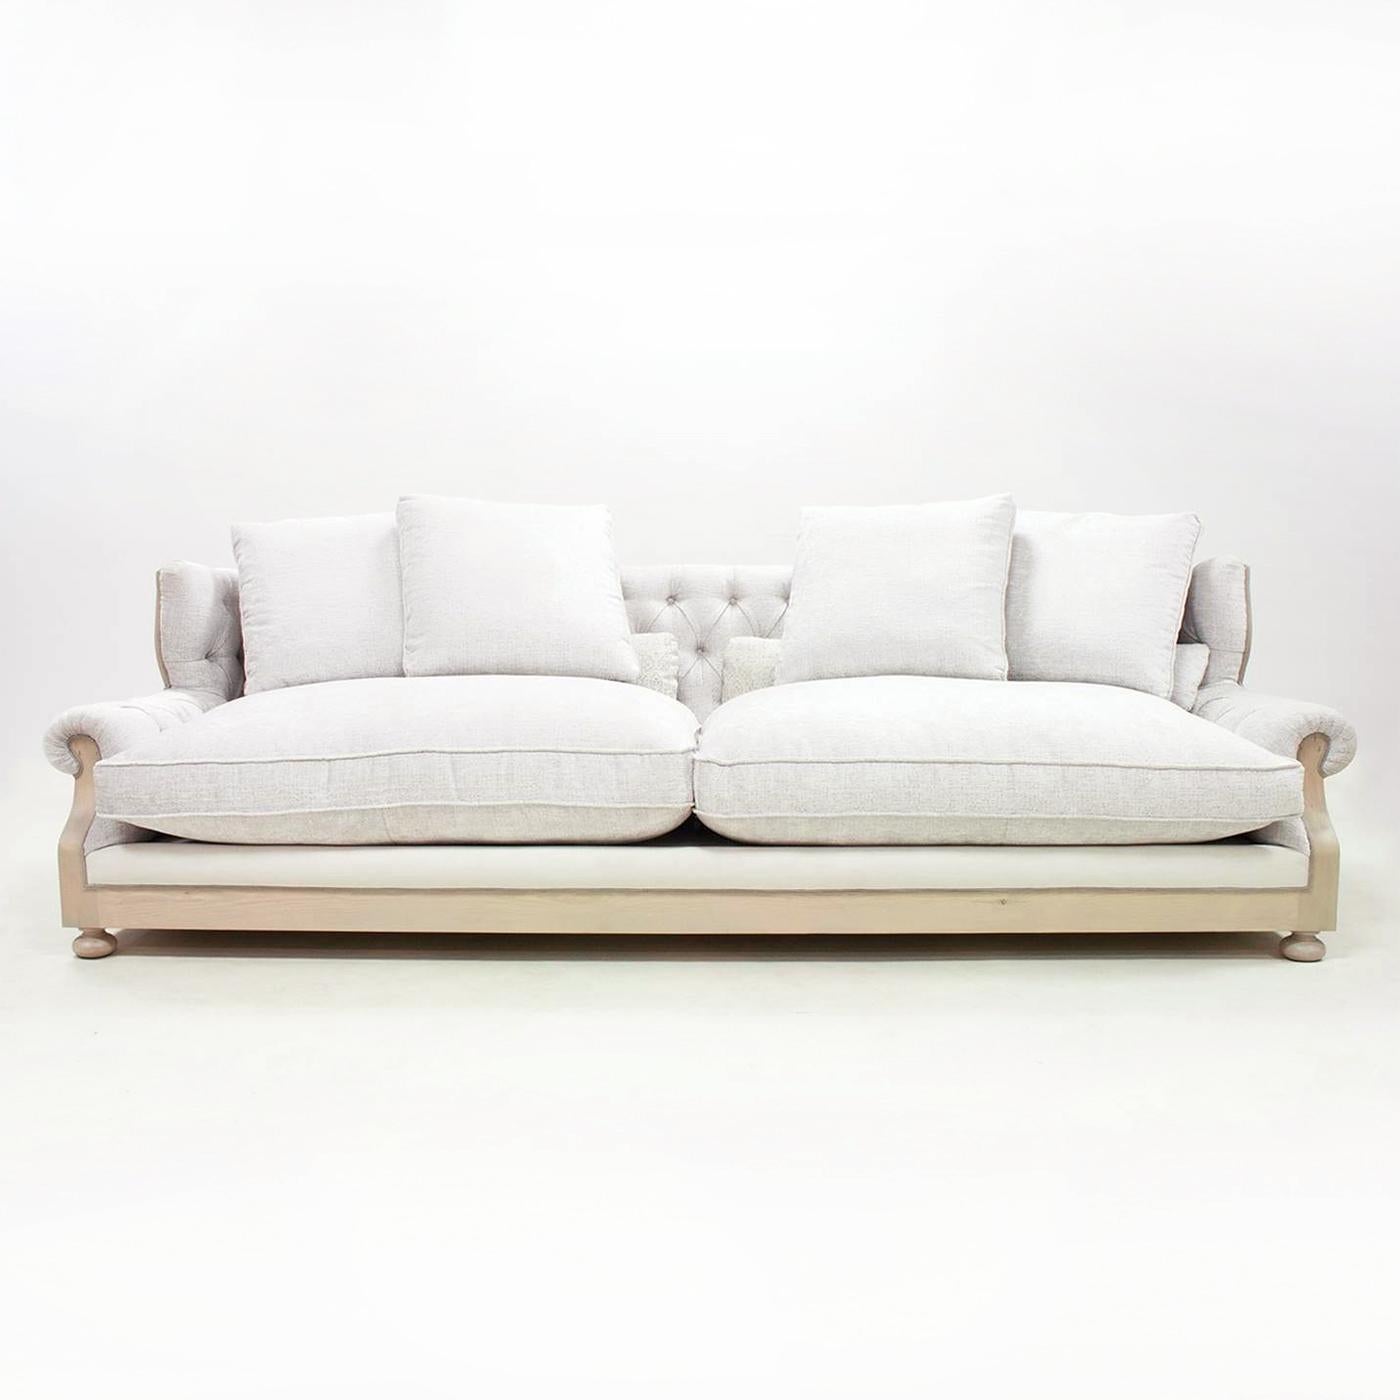 Sofa Damian with structure in solid wood in waxed finish.
2 cushion seater, capitonated back and back cushions (included)
upholstered and covered with high quality old white linen fabric.
With natural cane on back seat and with gilded nails at